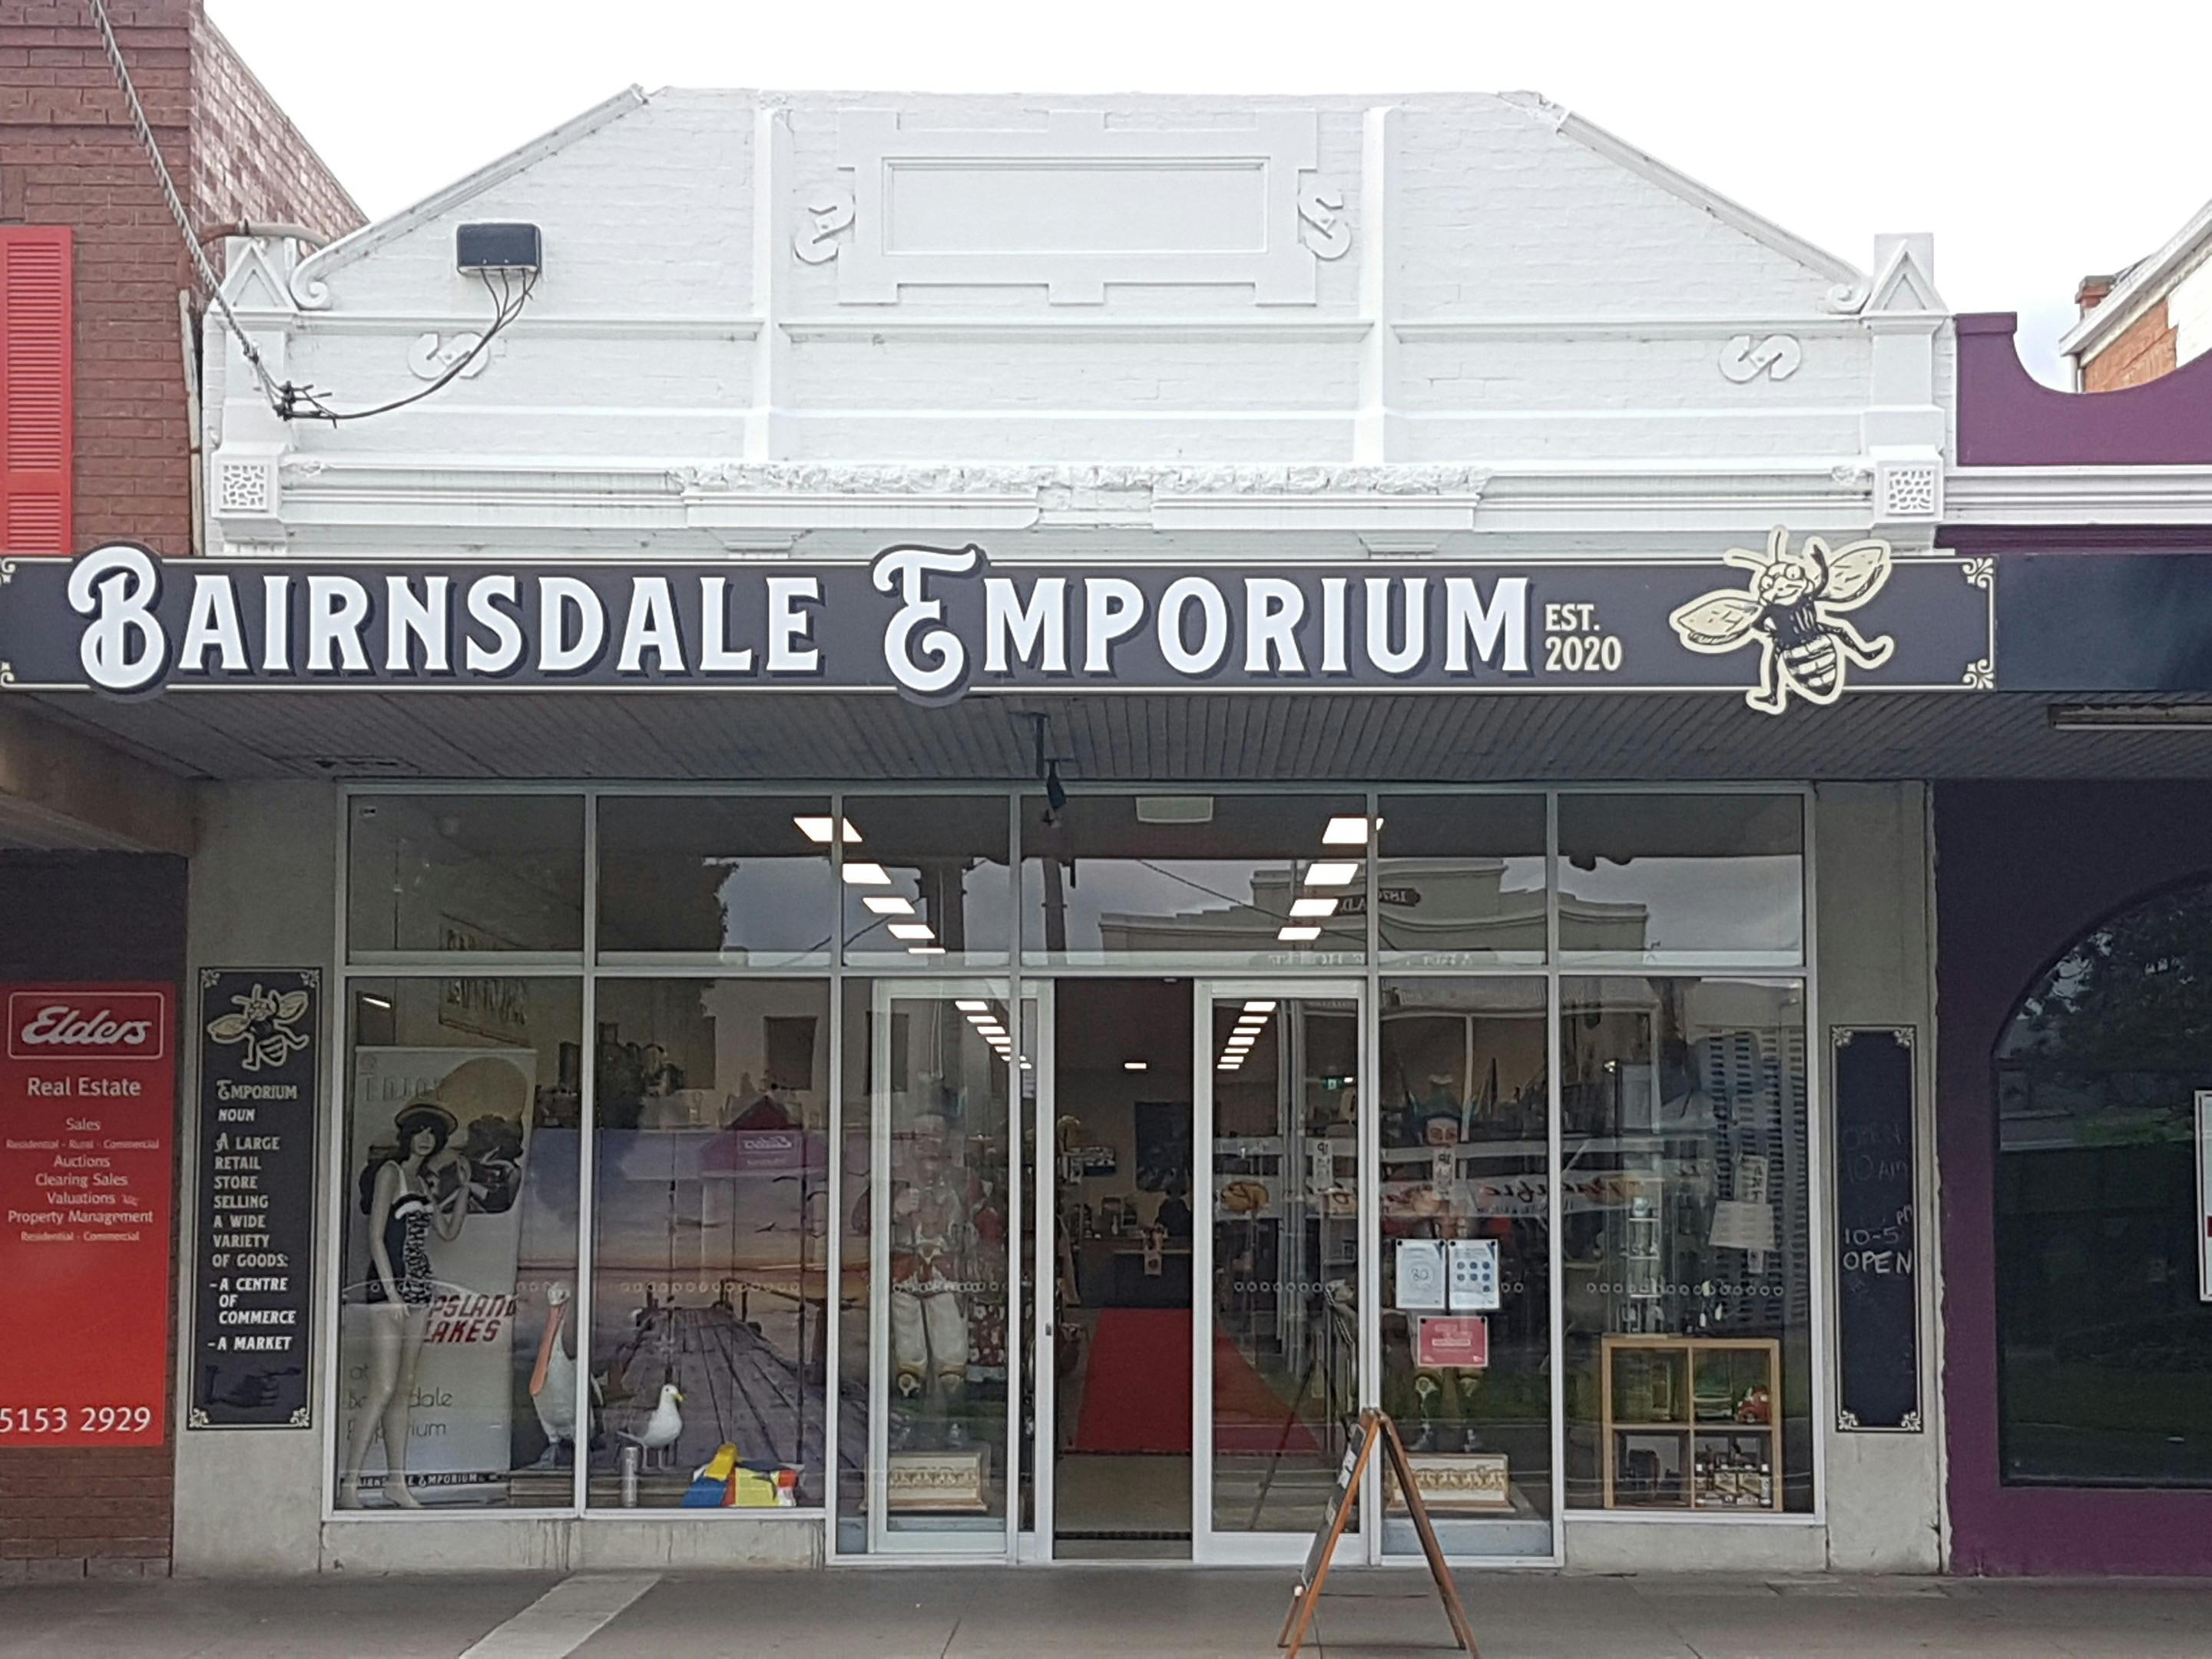 Front window and entrance to the Bairnsdale Emporium